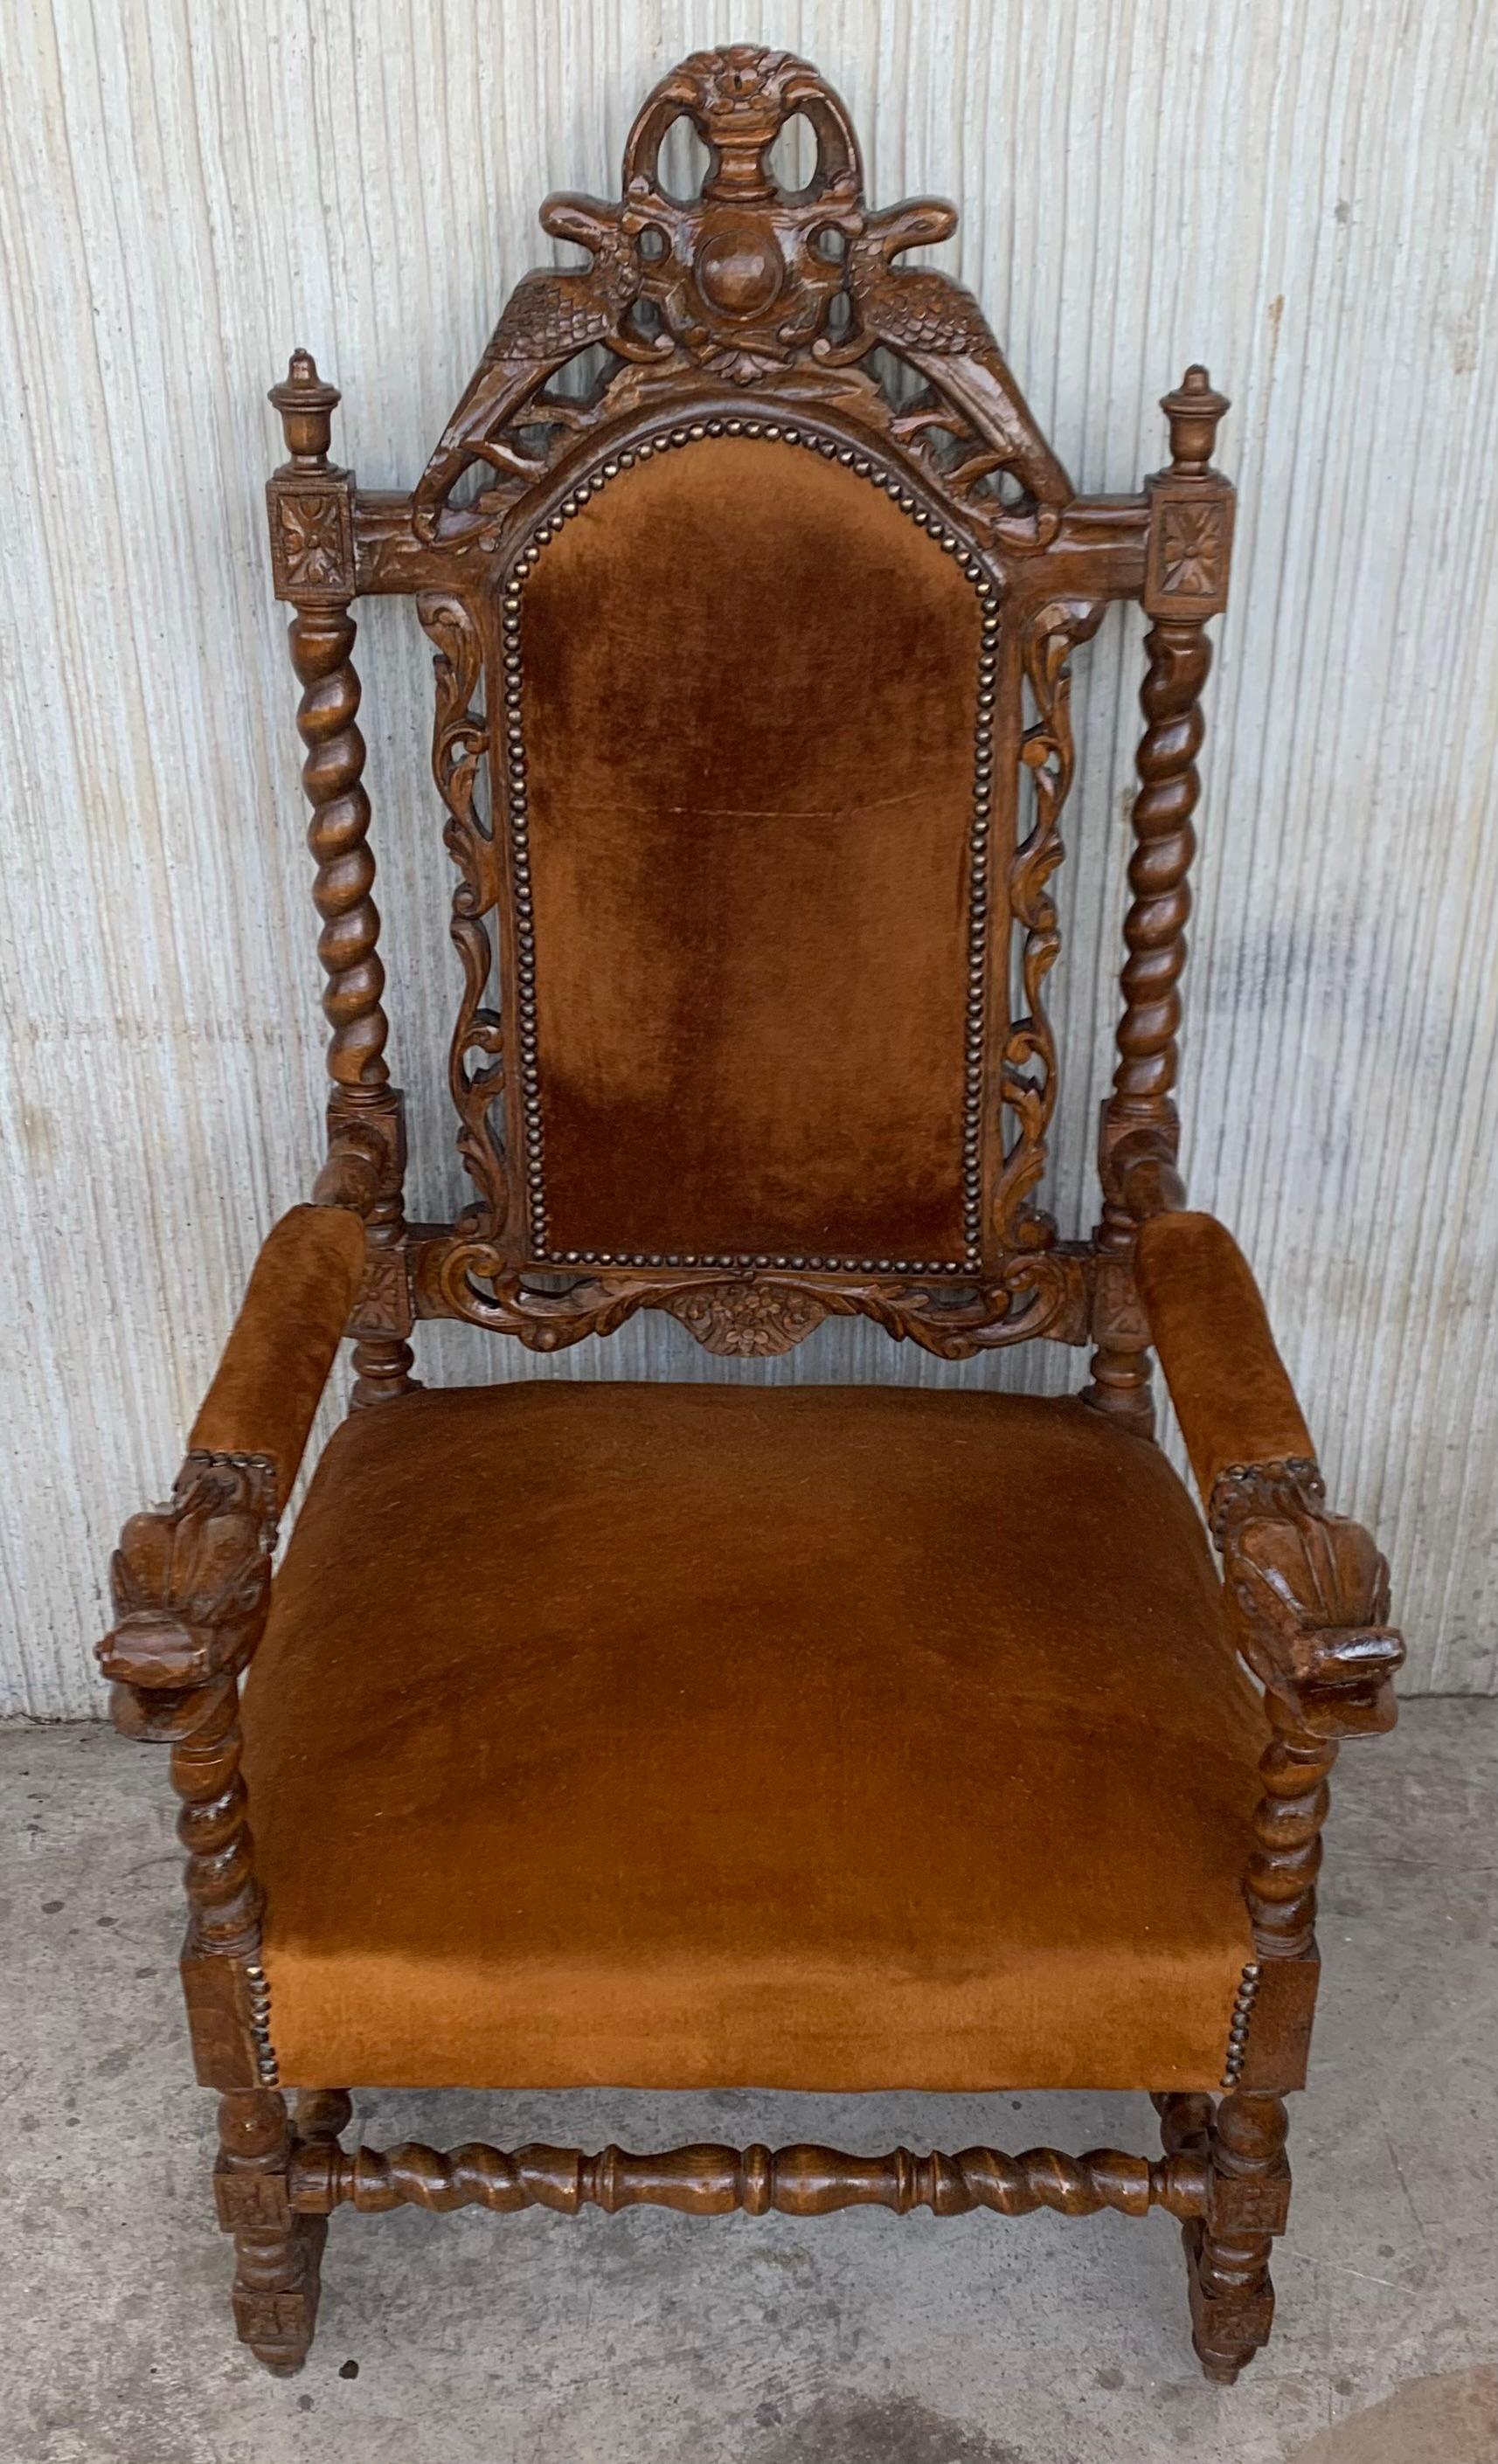 Louis XVI style pair of carved armchairs, Spain, 1900s
Good antique condition with some minor marks from used and age.
Beautiful Solomonic columns in the back , awesome crest and impressive carved arms.
Brown velvet in seat and